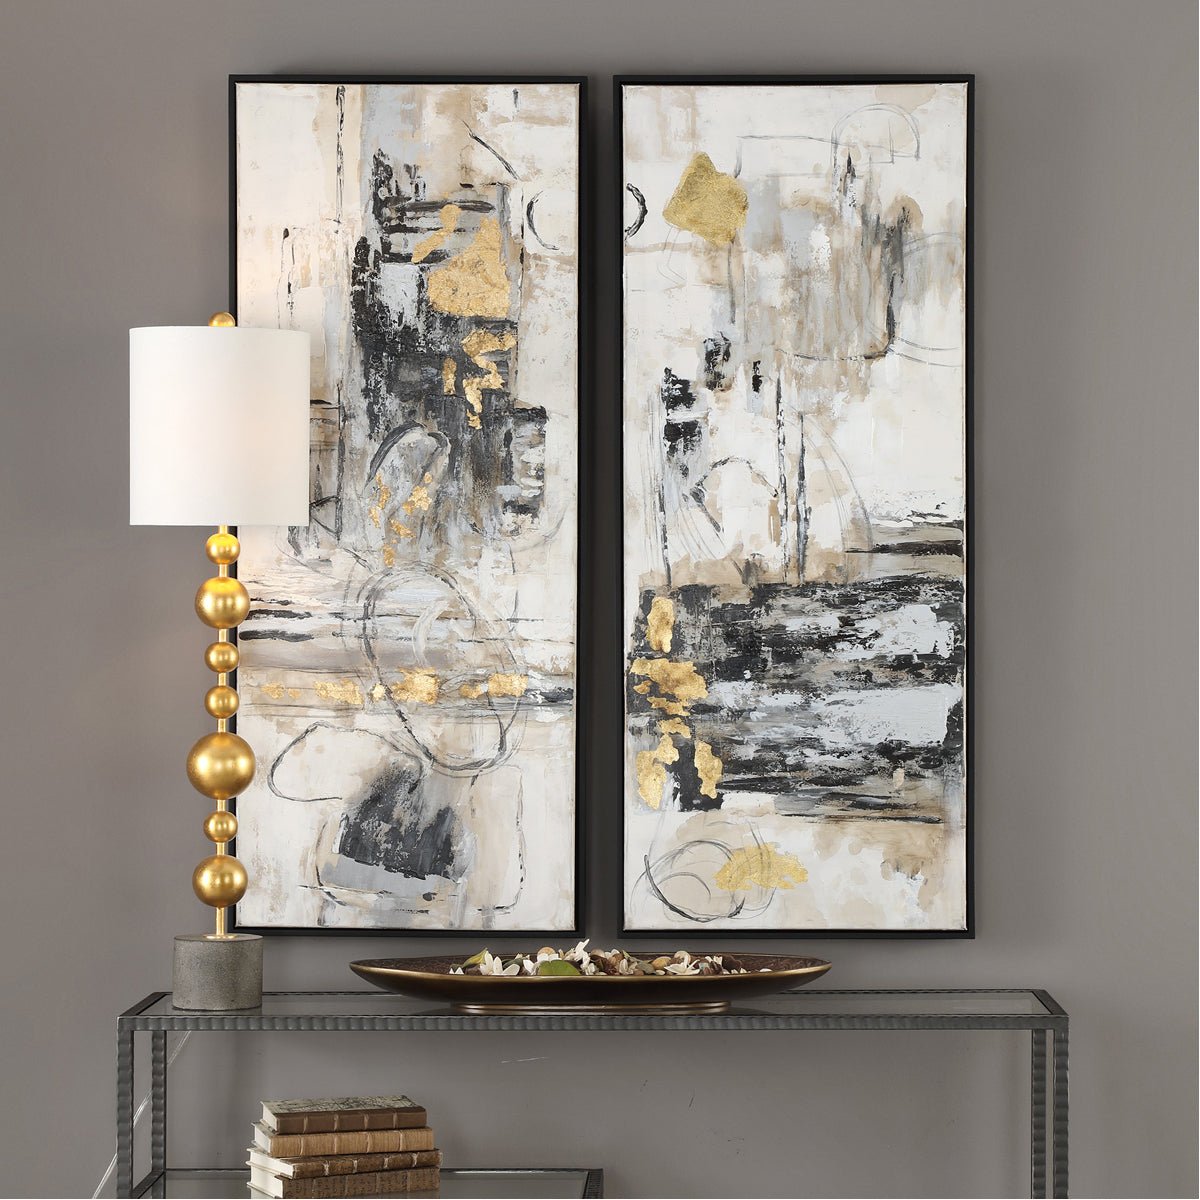 Uttermost Life Scenes Abstract Art, Set of 2